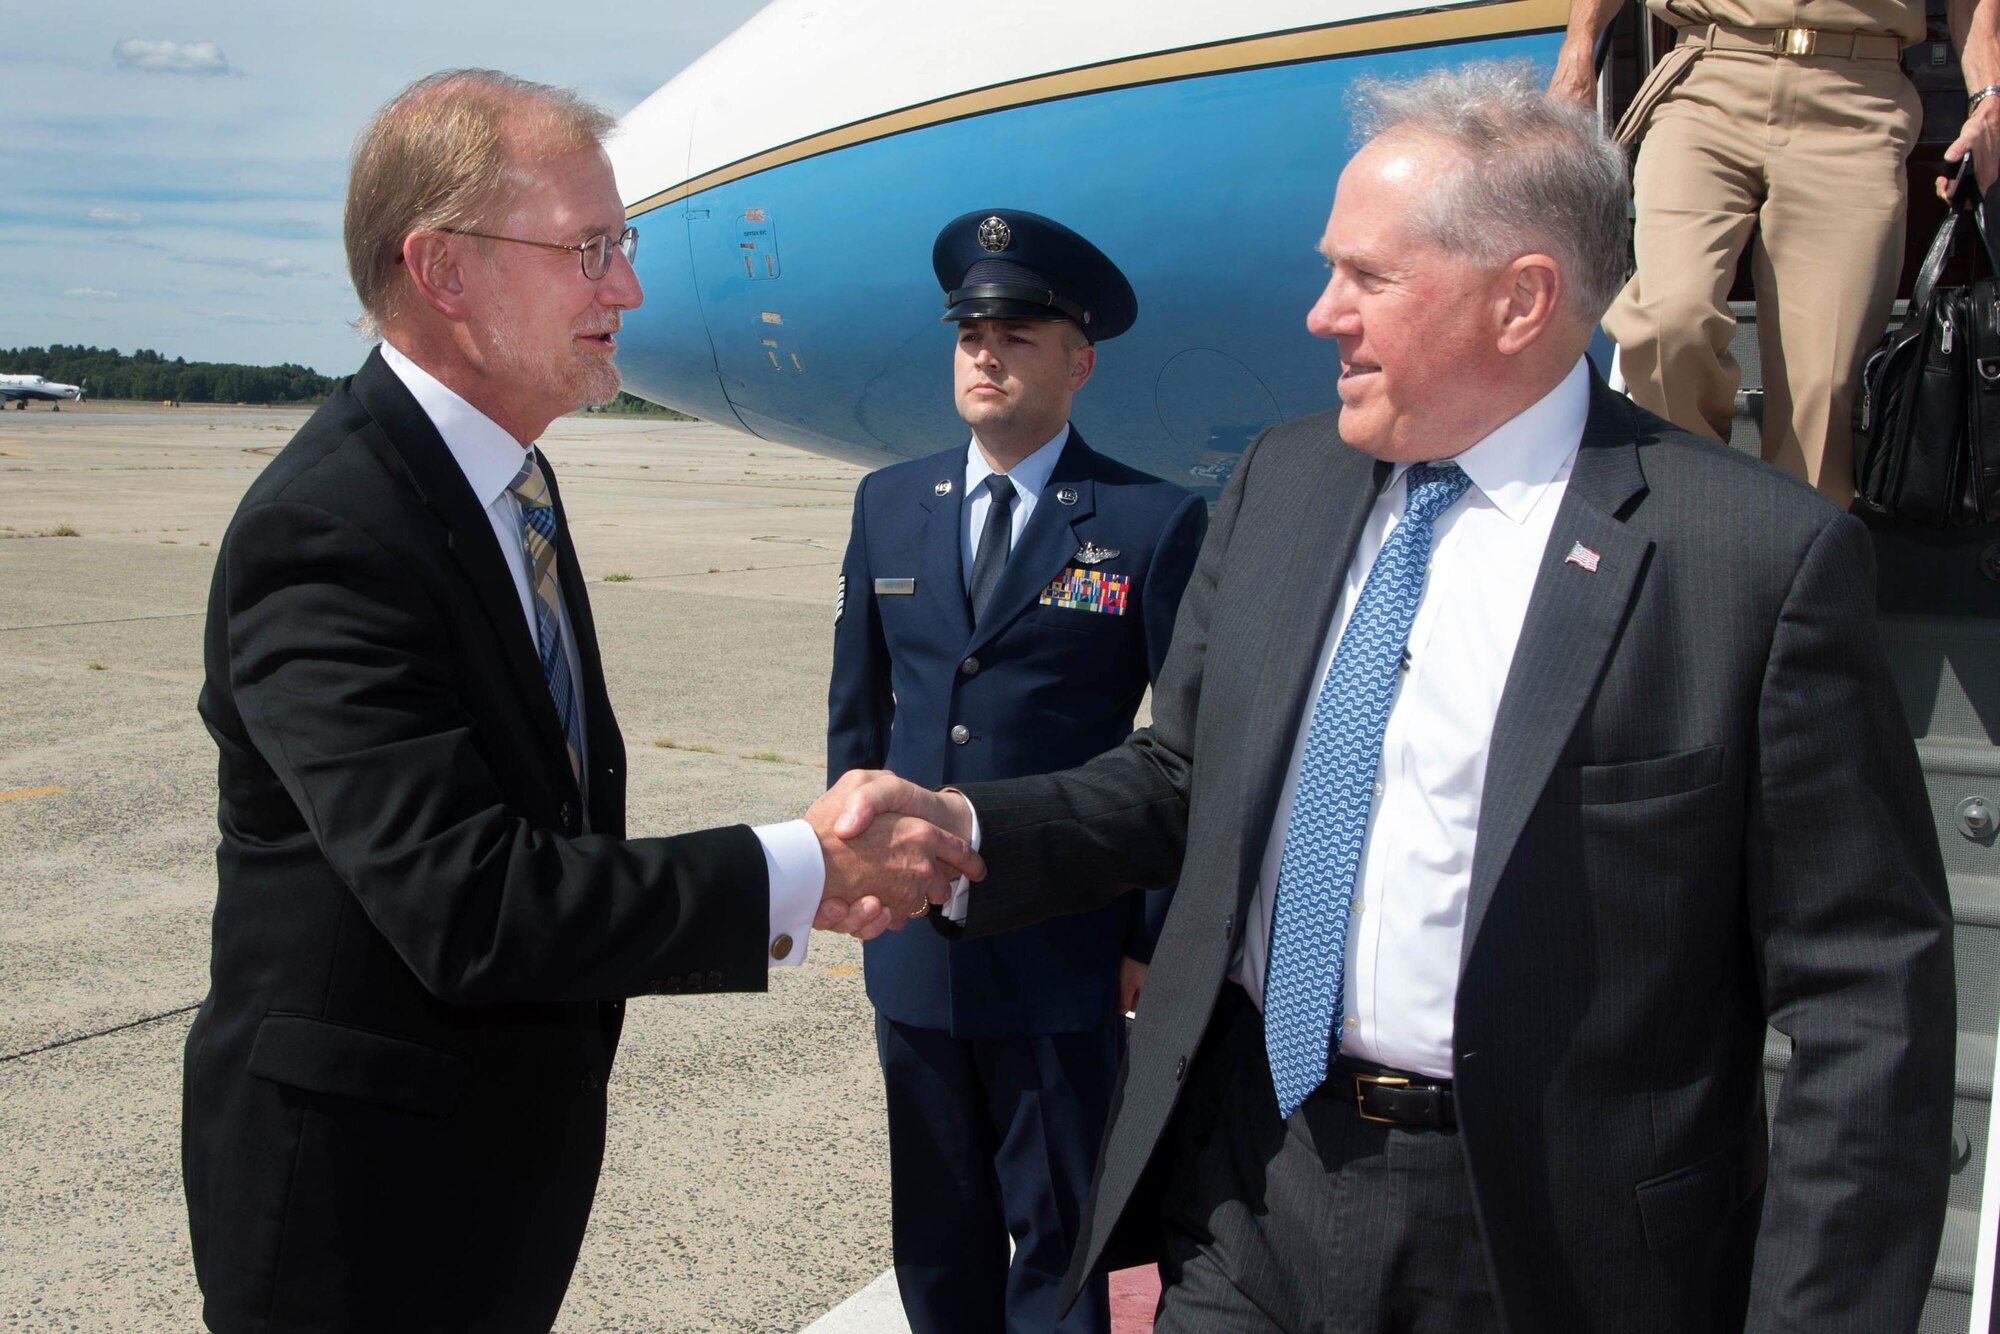 Undersecretary of Defense for Acquisition, Technology and Logistics Frank Kendall is greeted by Steve Wert, Battle Management program executive officer, on the flight line at Hanscom Air Force Base, Mass., Aug. 30. Kendall came to Hanscom to attend meetings at the Massachusetts Institute of Technology’s Lincoln Laboratory. (U.S. Air Force photo by Jerry Saslav) 